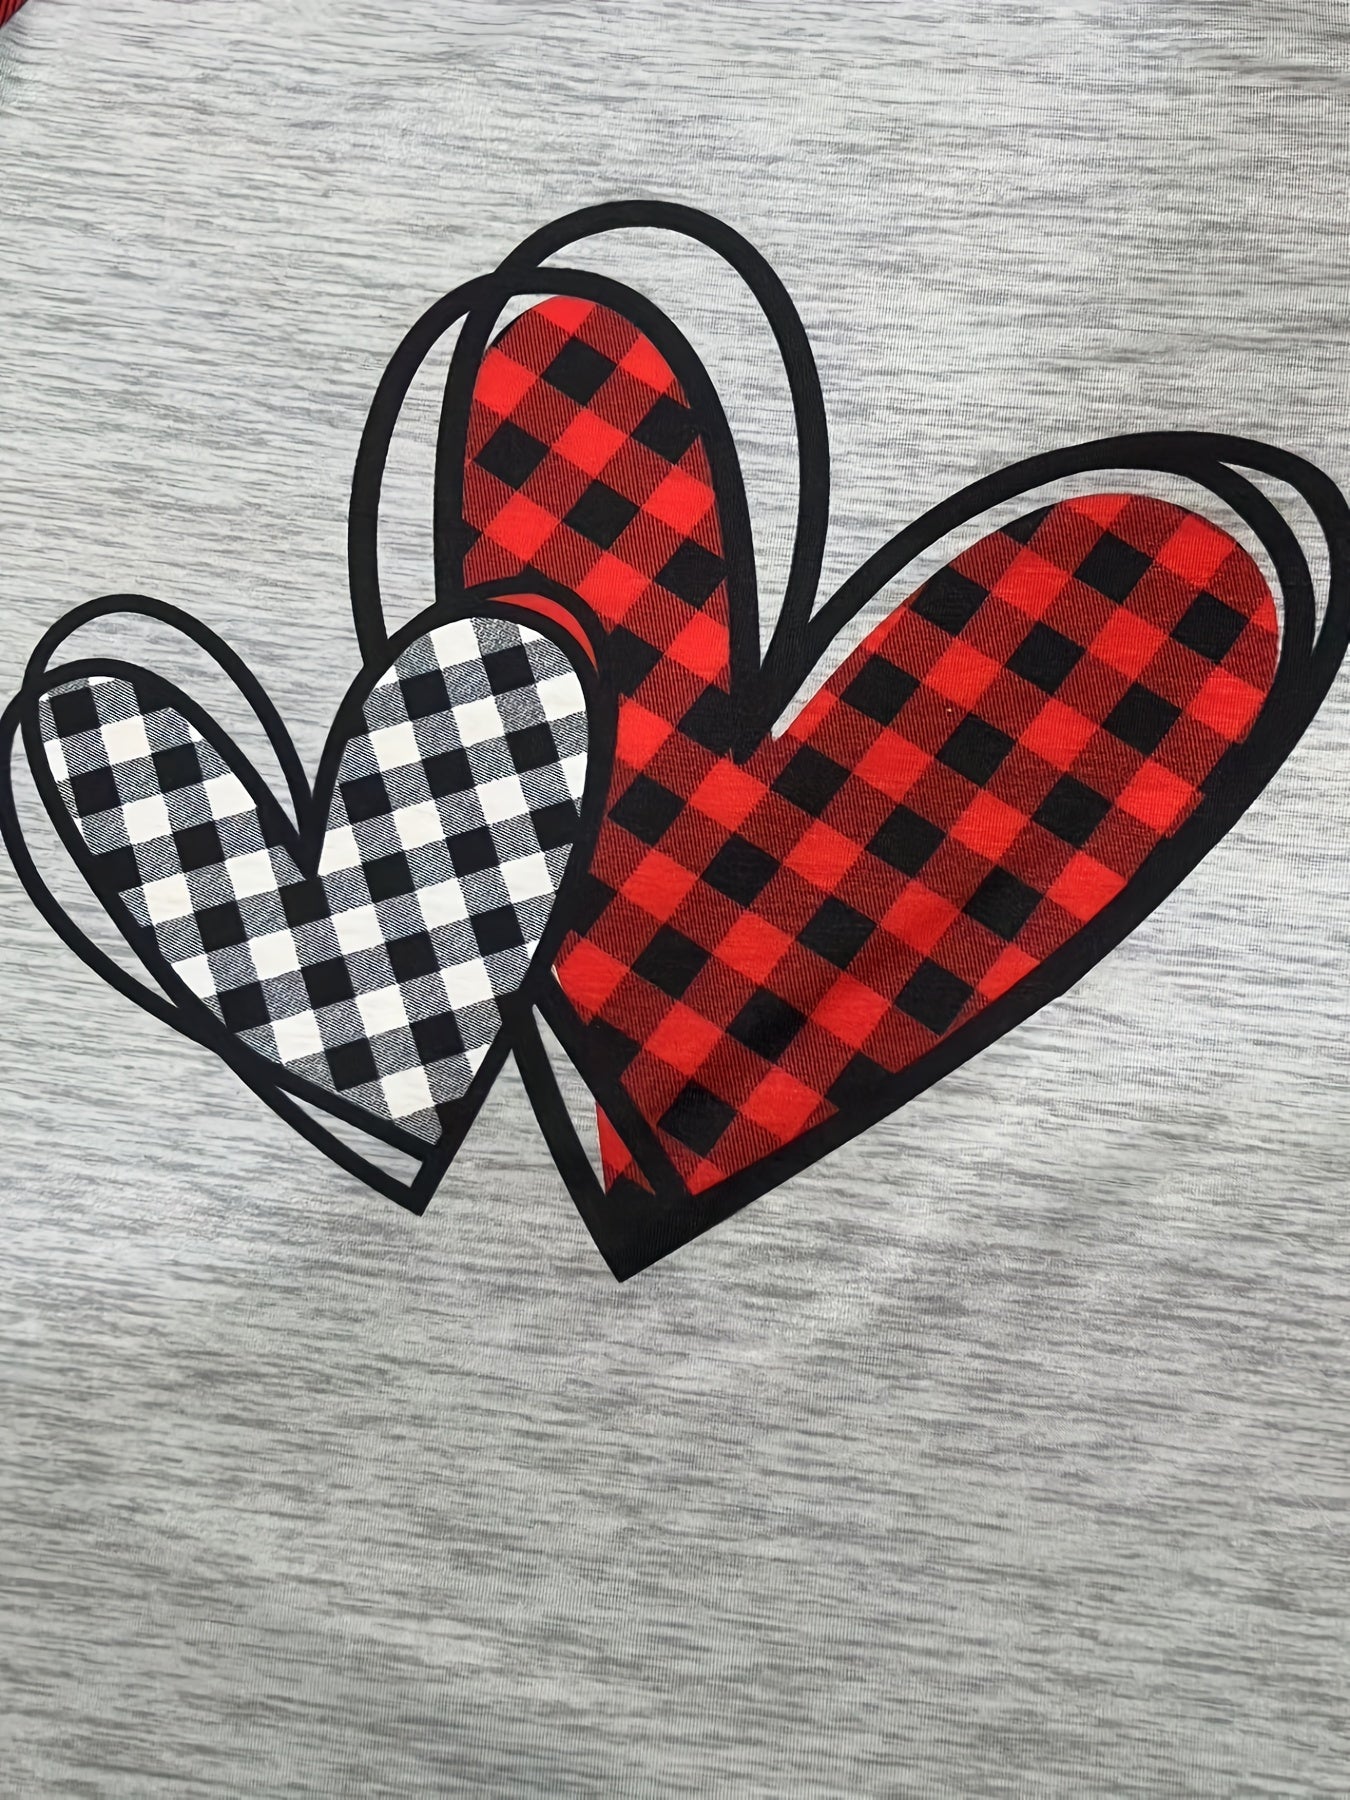 Plaid Heart & Stripe Print T-Shirt, Casual Long Sleeve Top For Spring & Fall, Women's Clothing